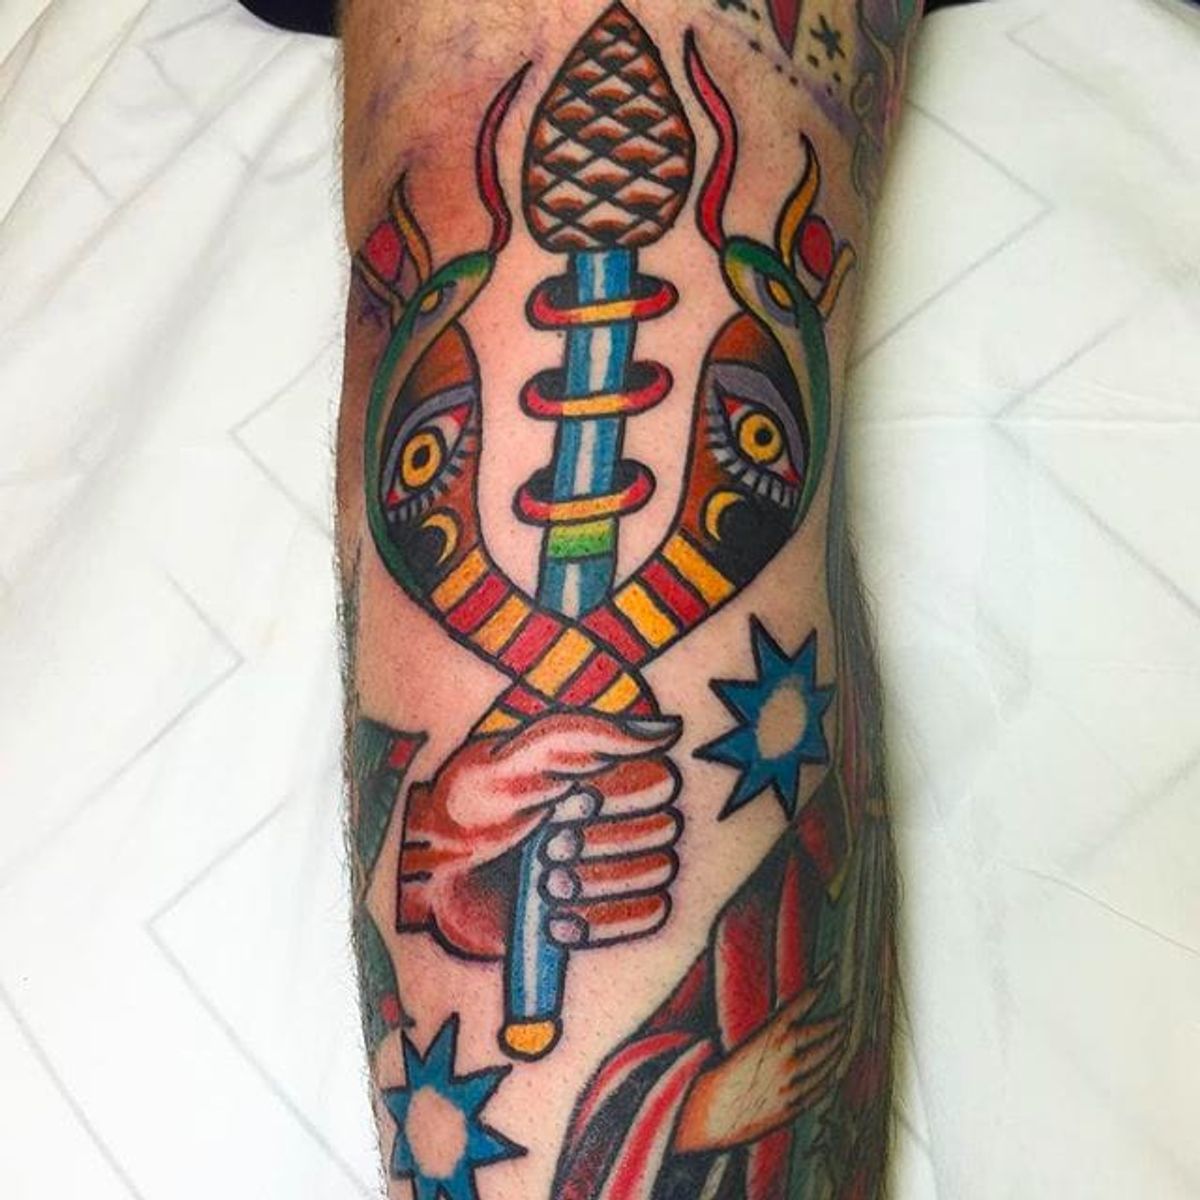 Tattoo uploaded by rcallejatattoo • Snakes, pine cone staff. The ...